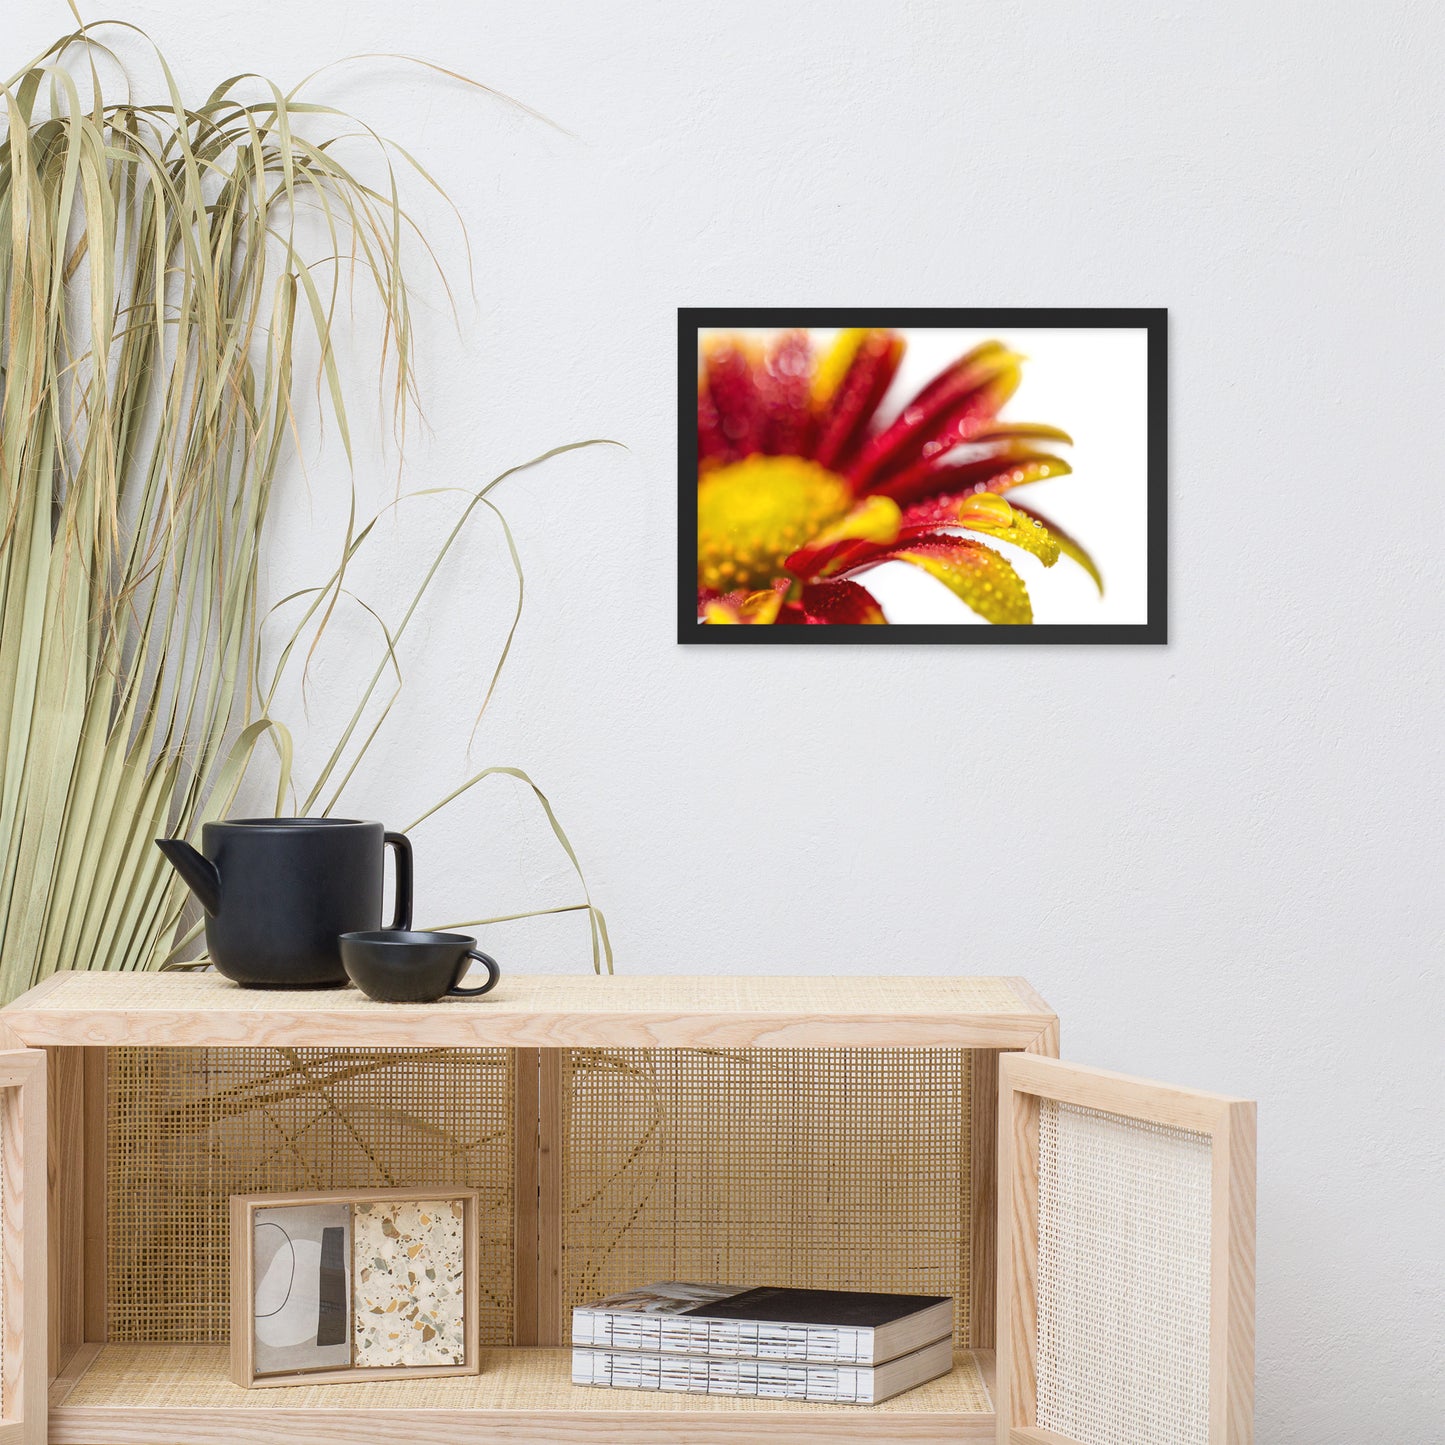 Water Droplets On Mum Petals Floral Nature Photo Framed Wall Art Print